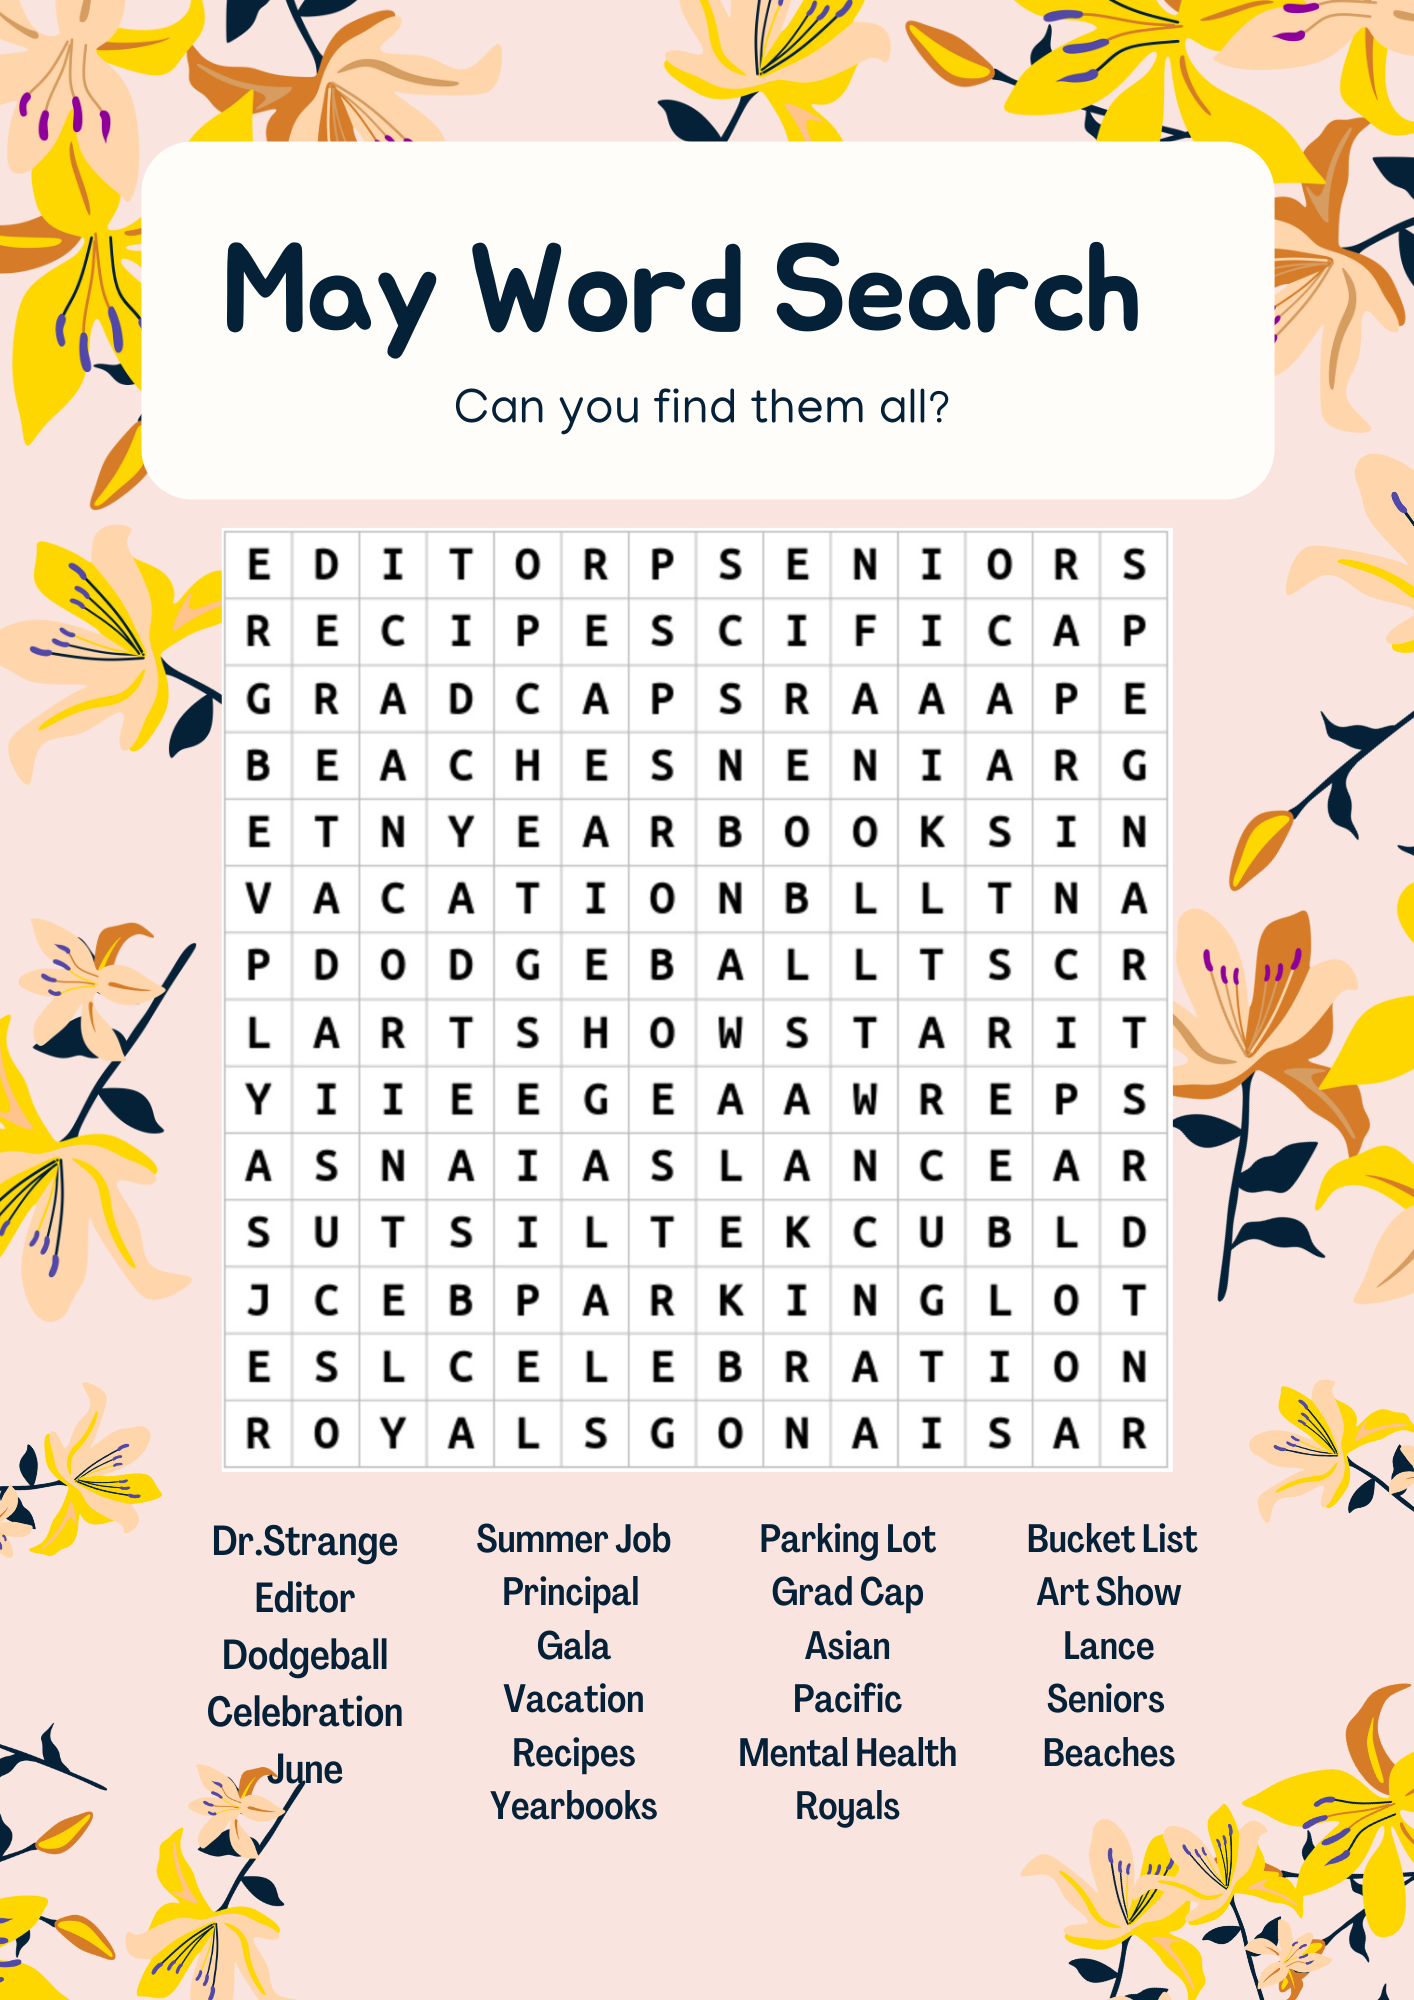 Beatles' Songs Printable Word Search Puzzle